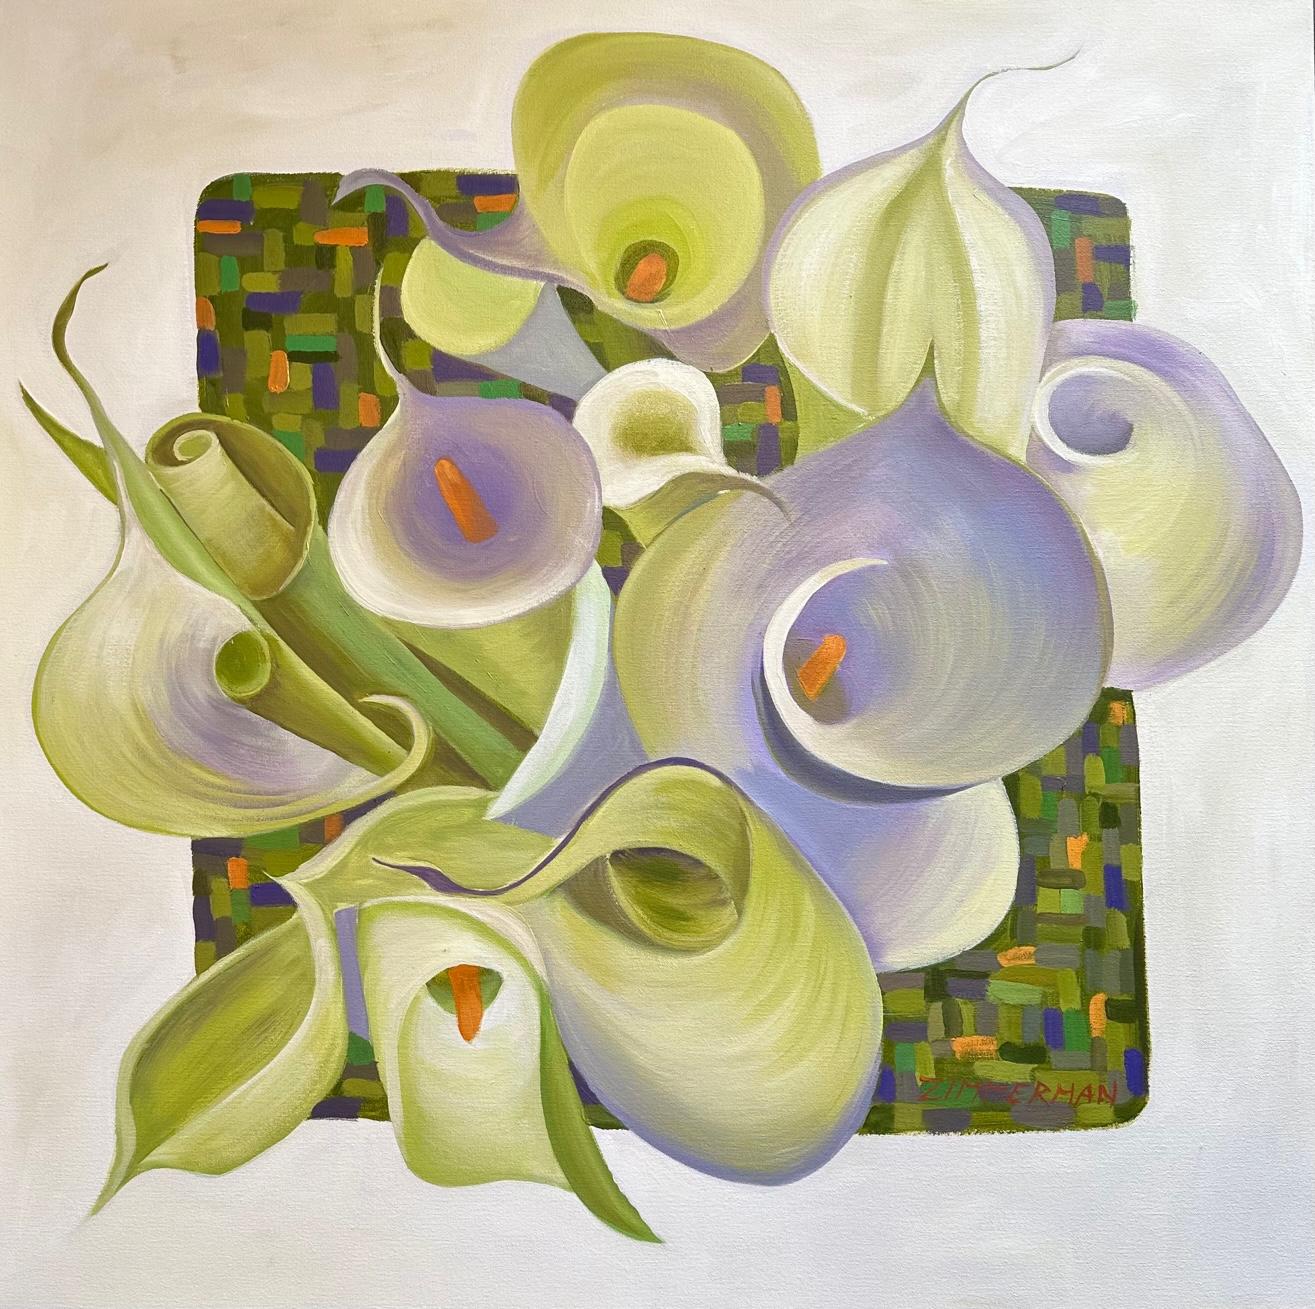 'Contained, Yet Expanding' - Calla Lily Flowers - Marc Zimmerman

This masterpiece is exhibited in the Zimmerman Gallery, Carmel CA.

ABOUT THE ARTIST
Marc Zimmerman is a visionary artist whose creations embody a captivating blend of playfulness and